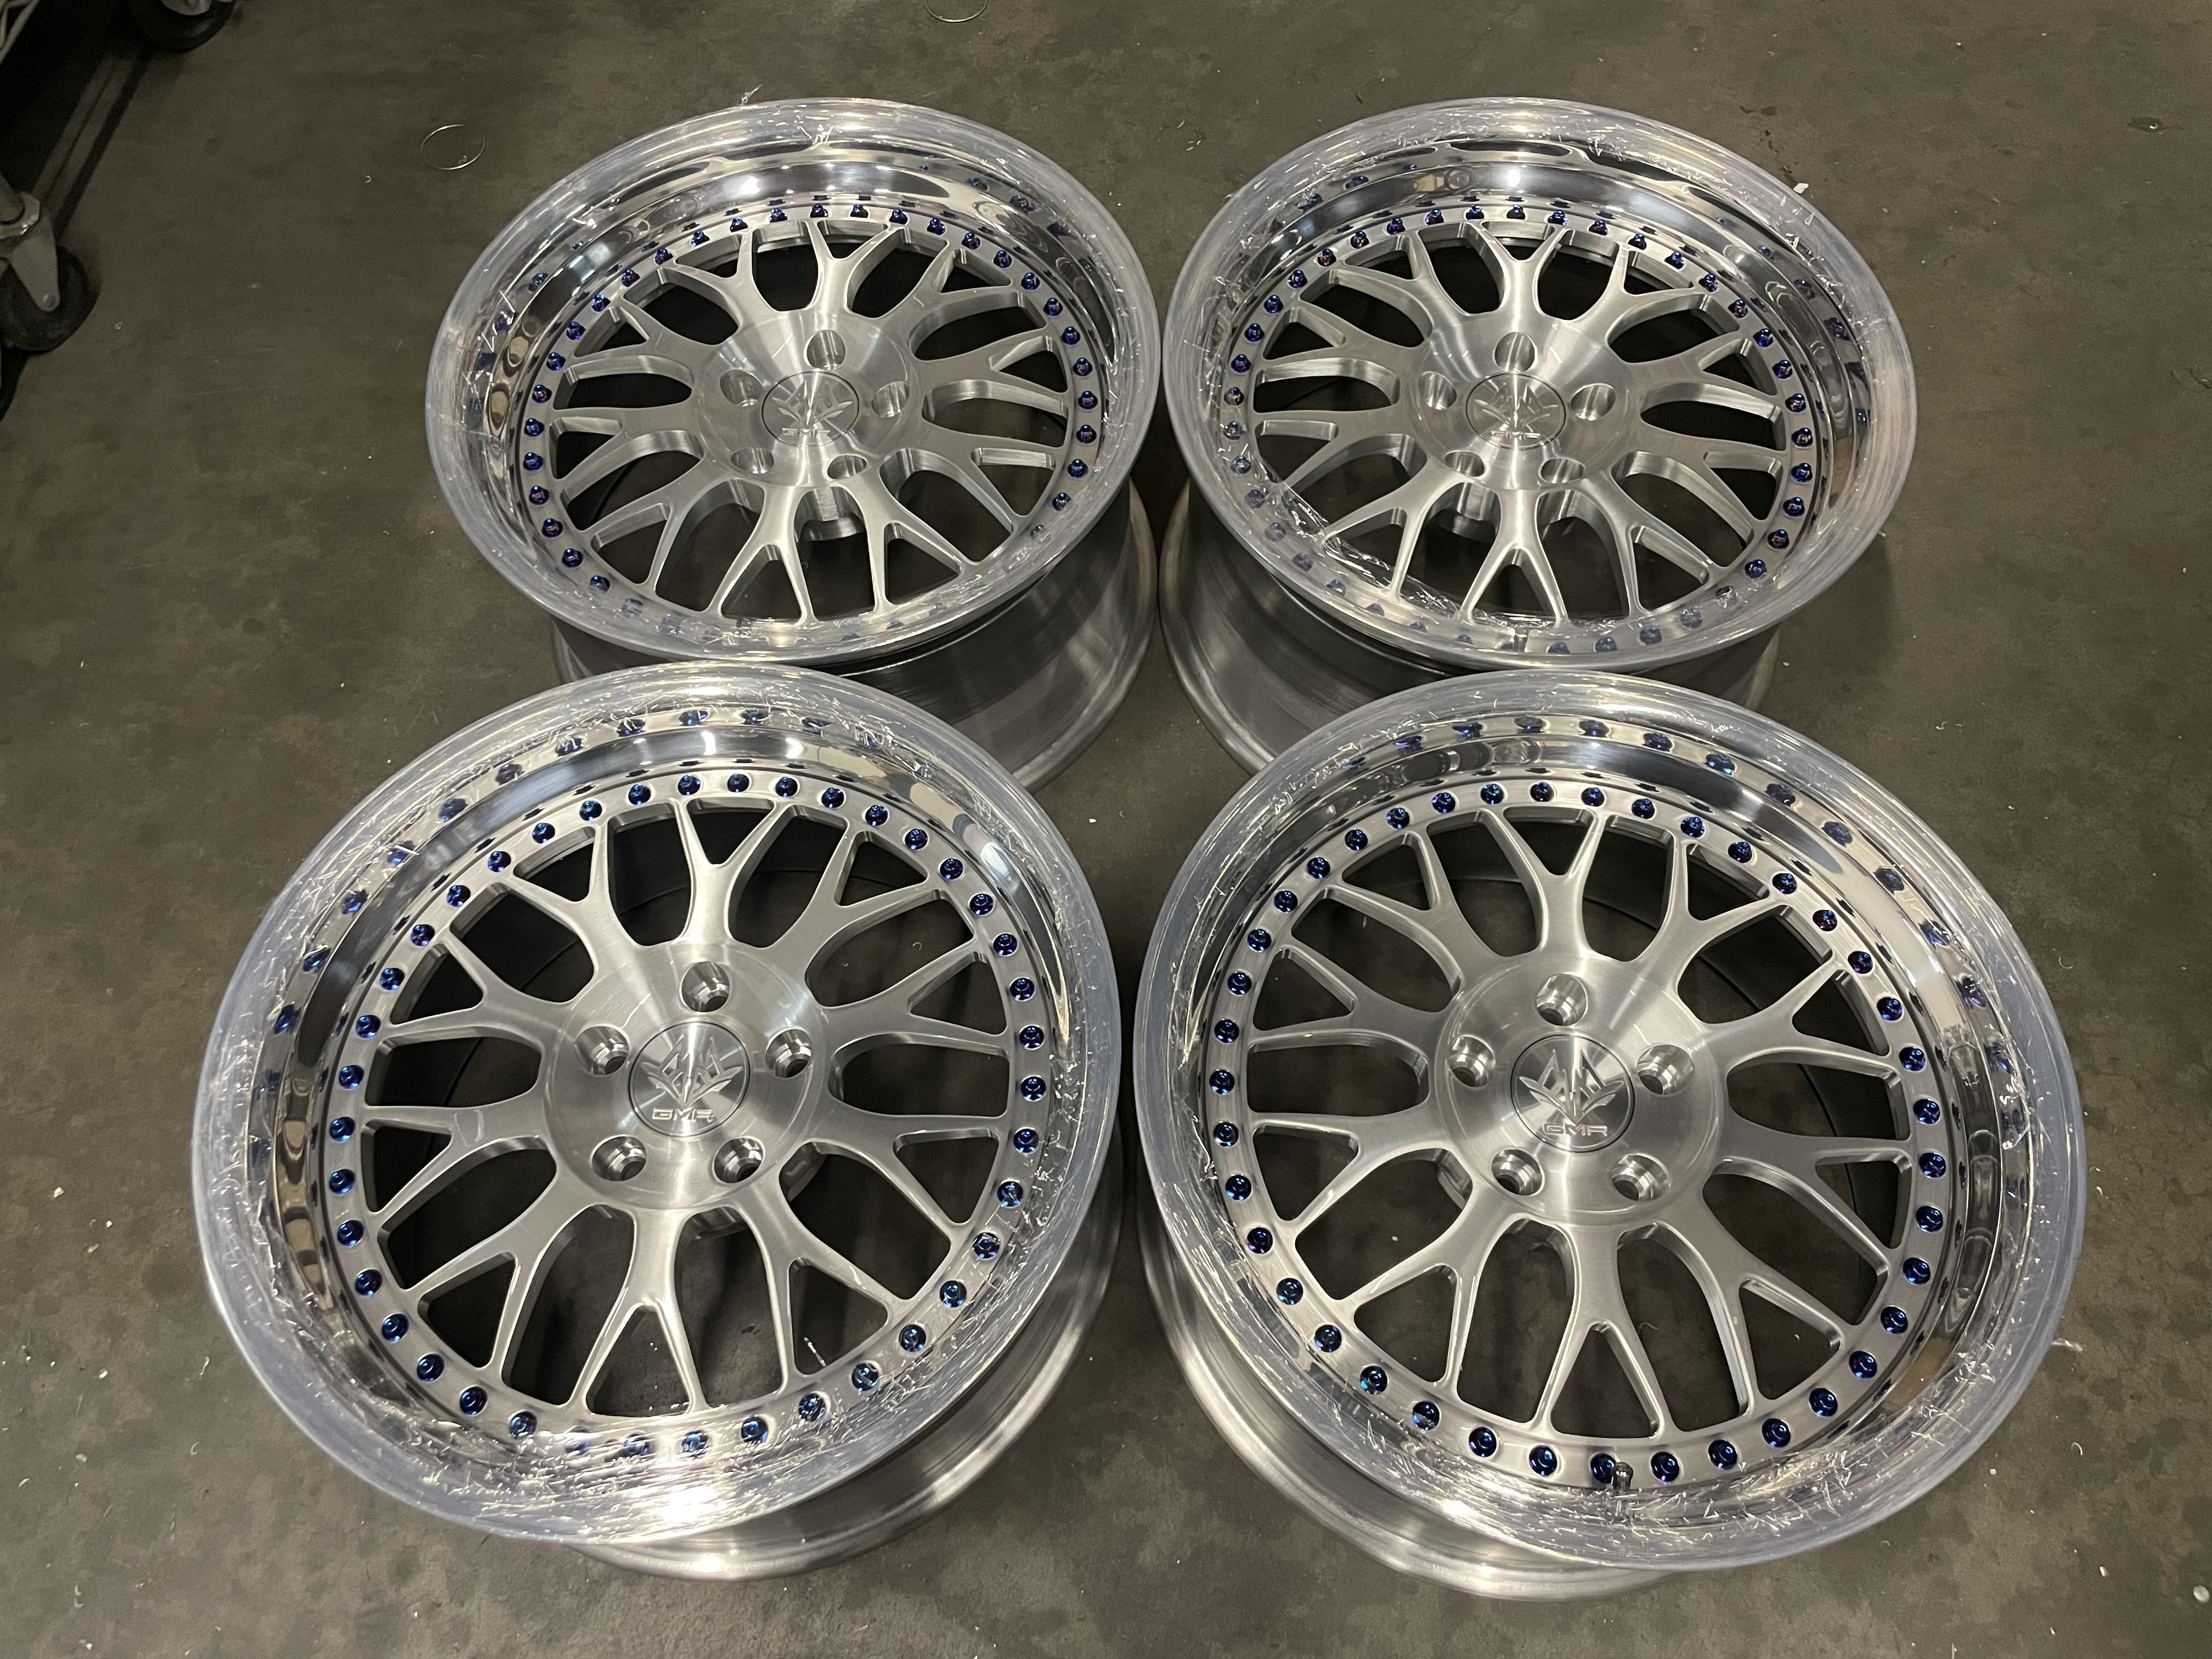 18" GMR GS-1 5x114.3 *BUILT TO ORDER*